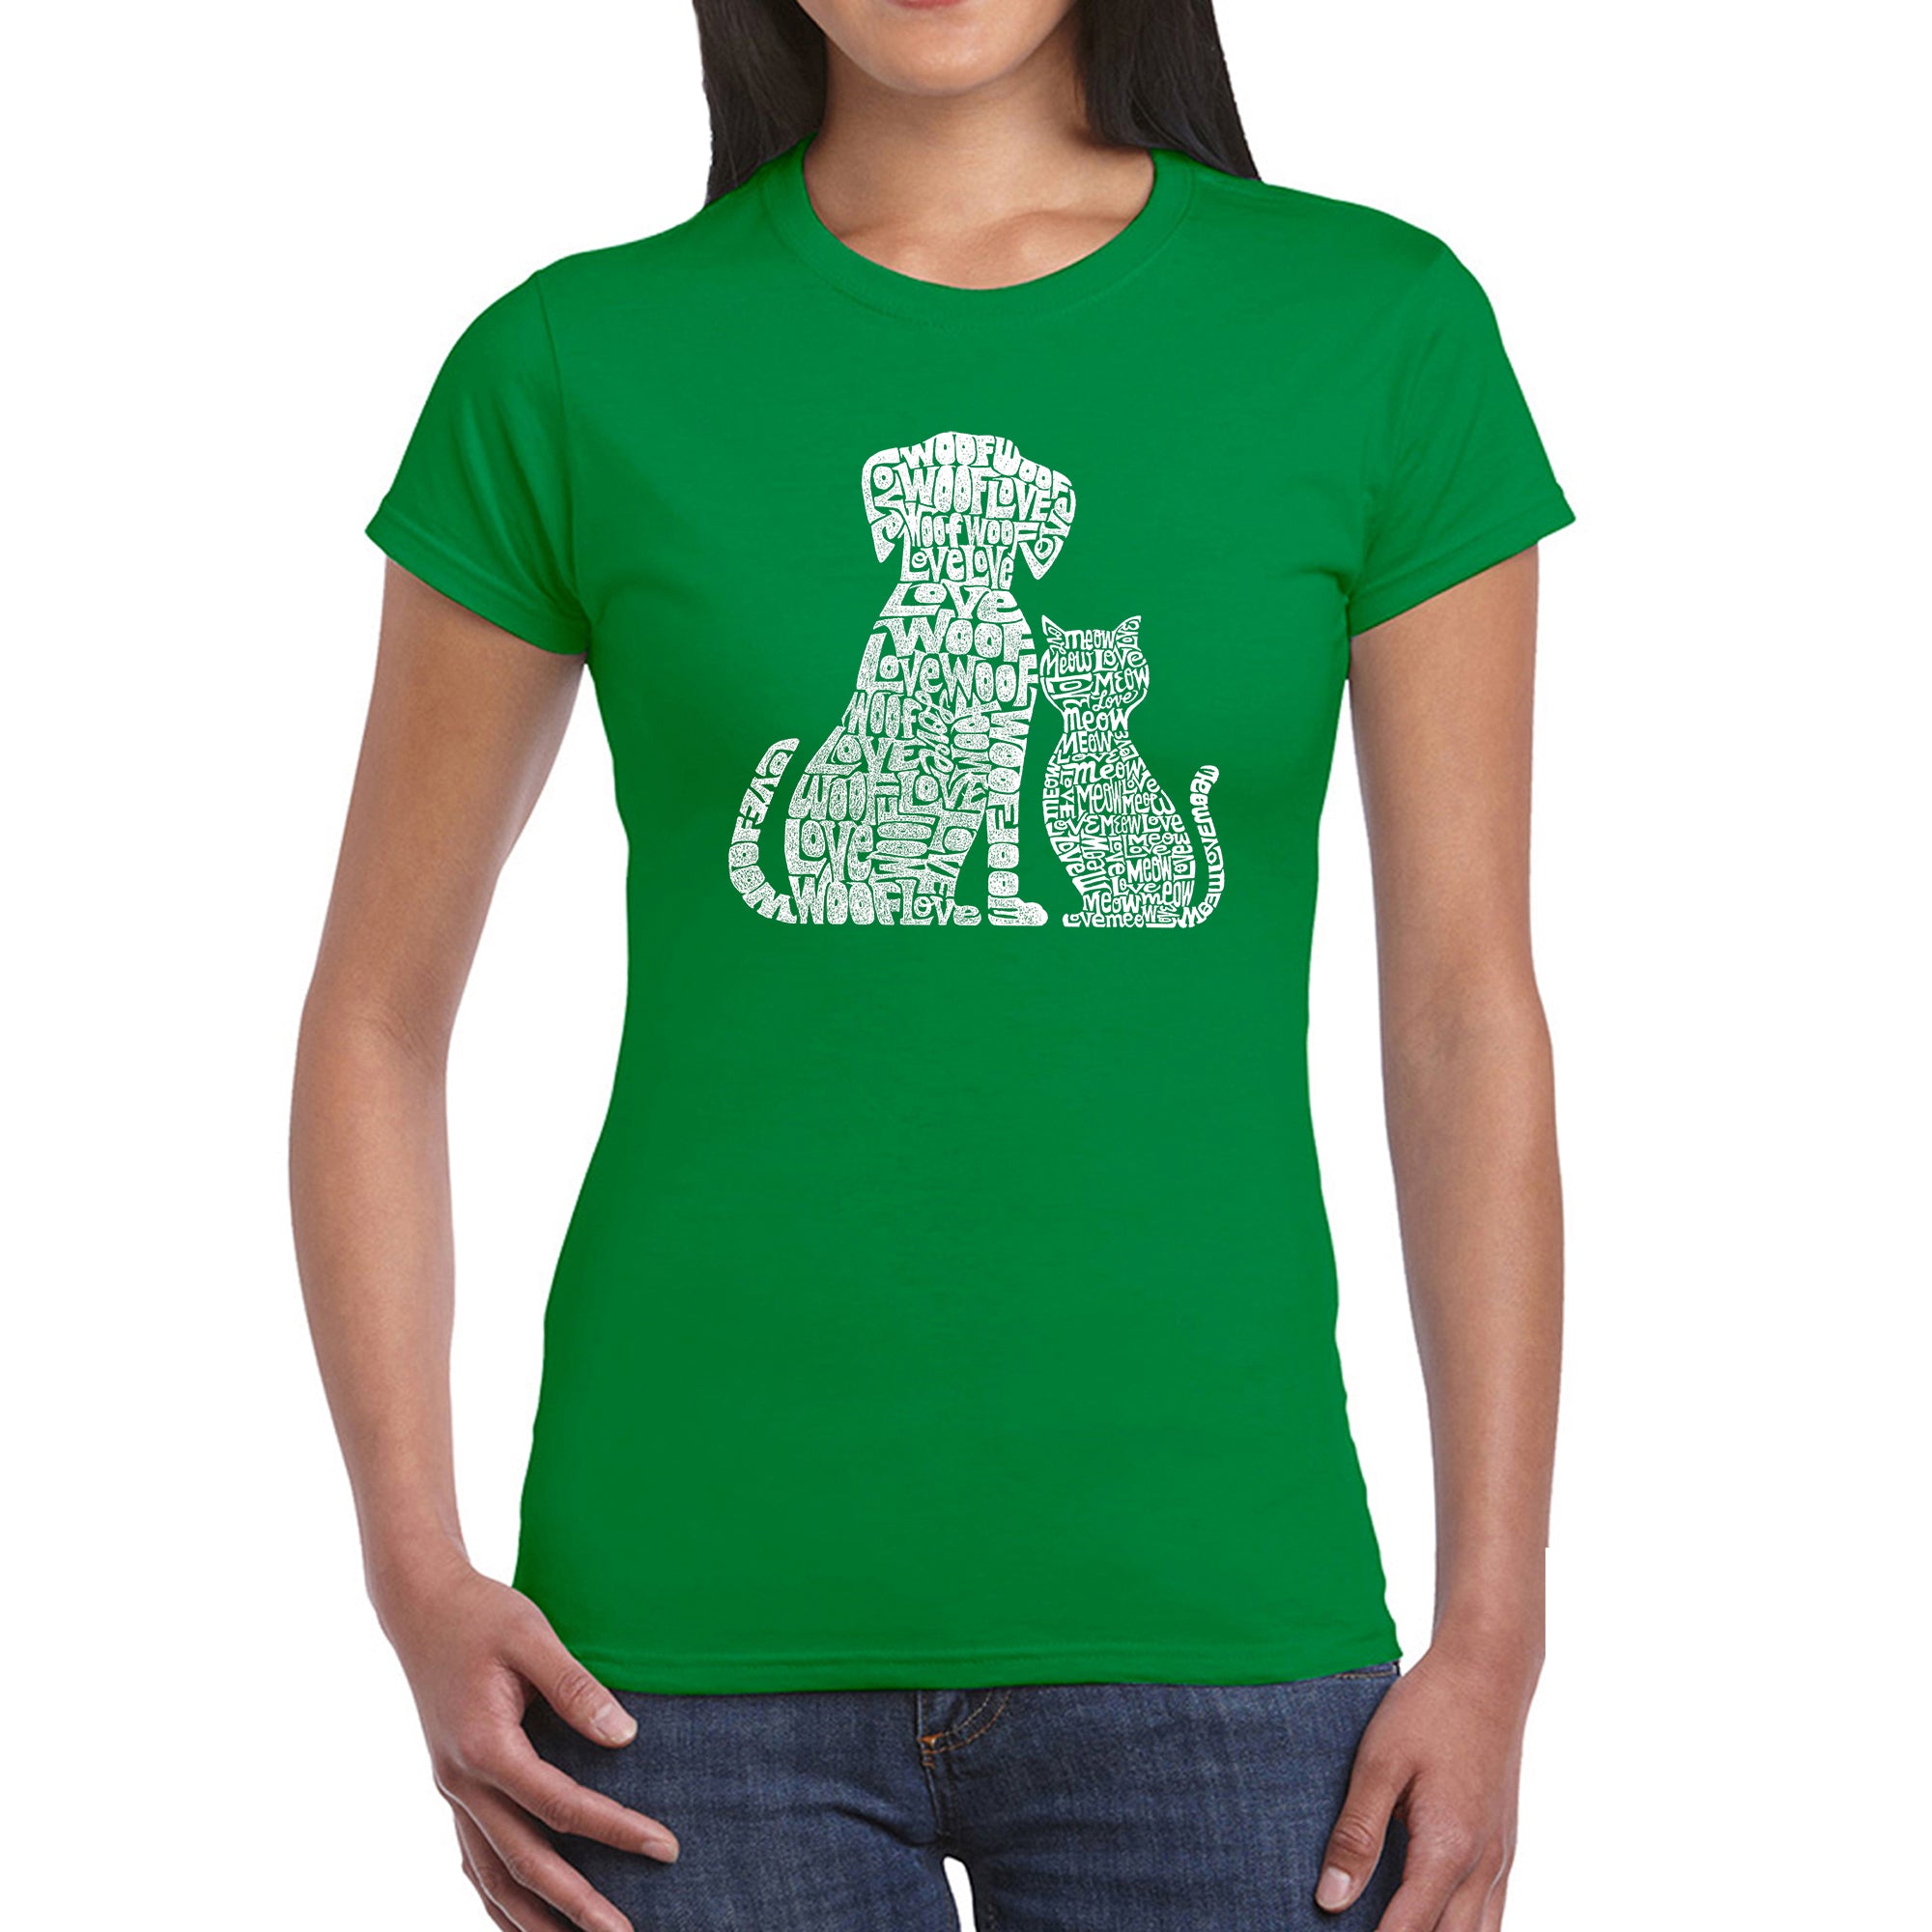 Dogs And Cats - Women's Word Art T-Shirt - Kelly - XS